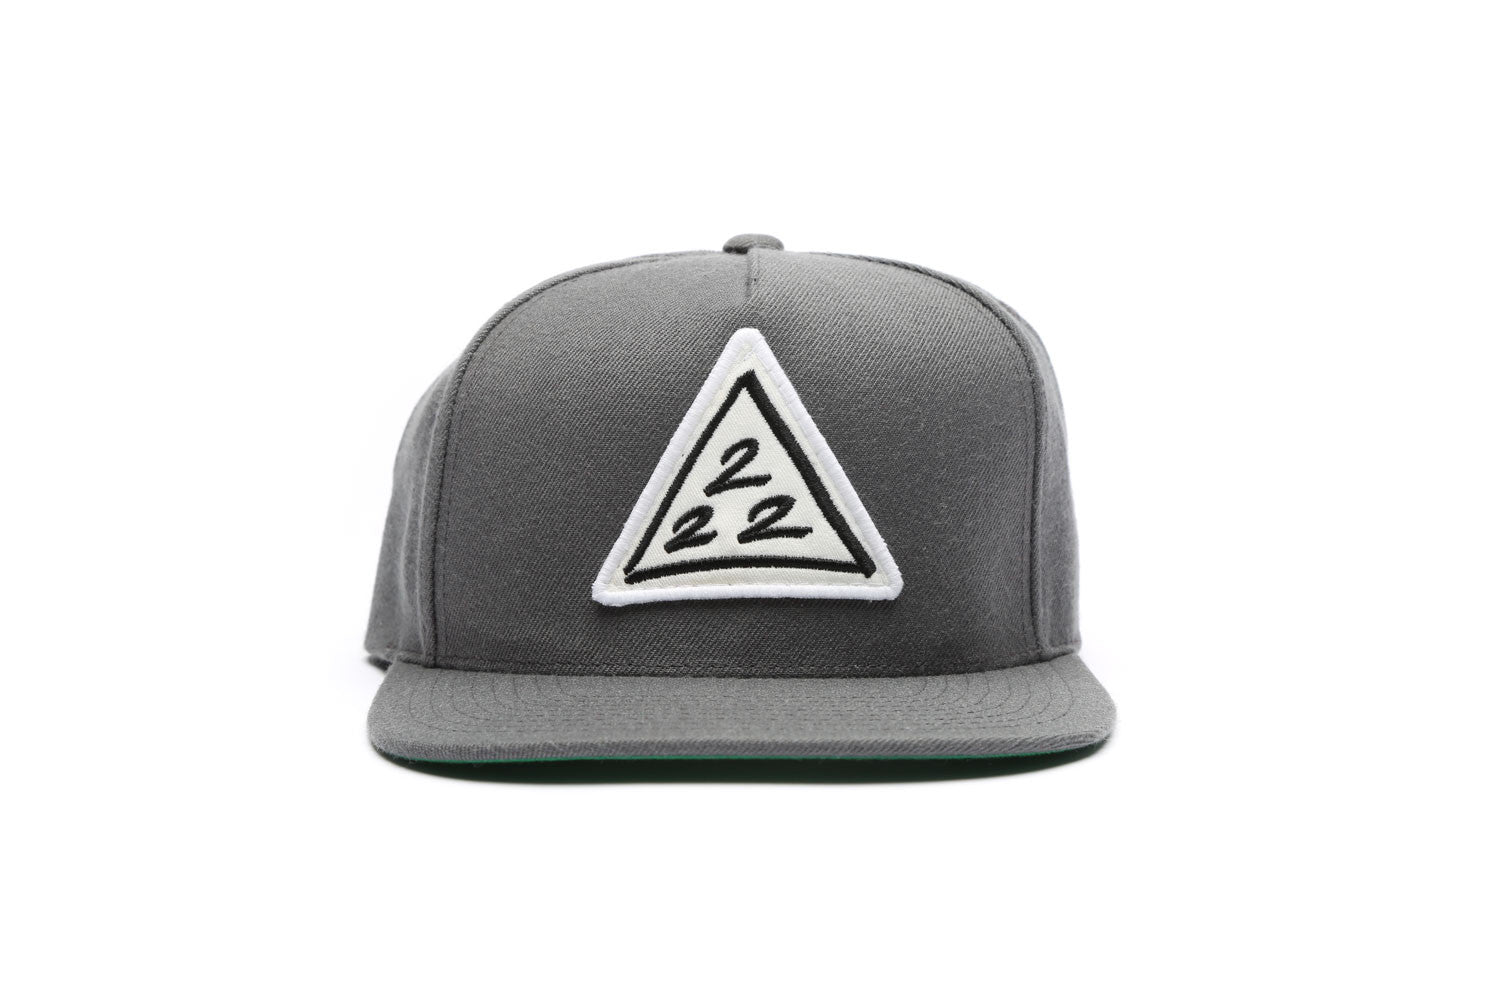 '222' LIMITED HAT